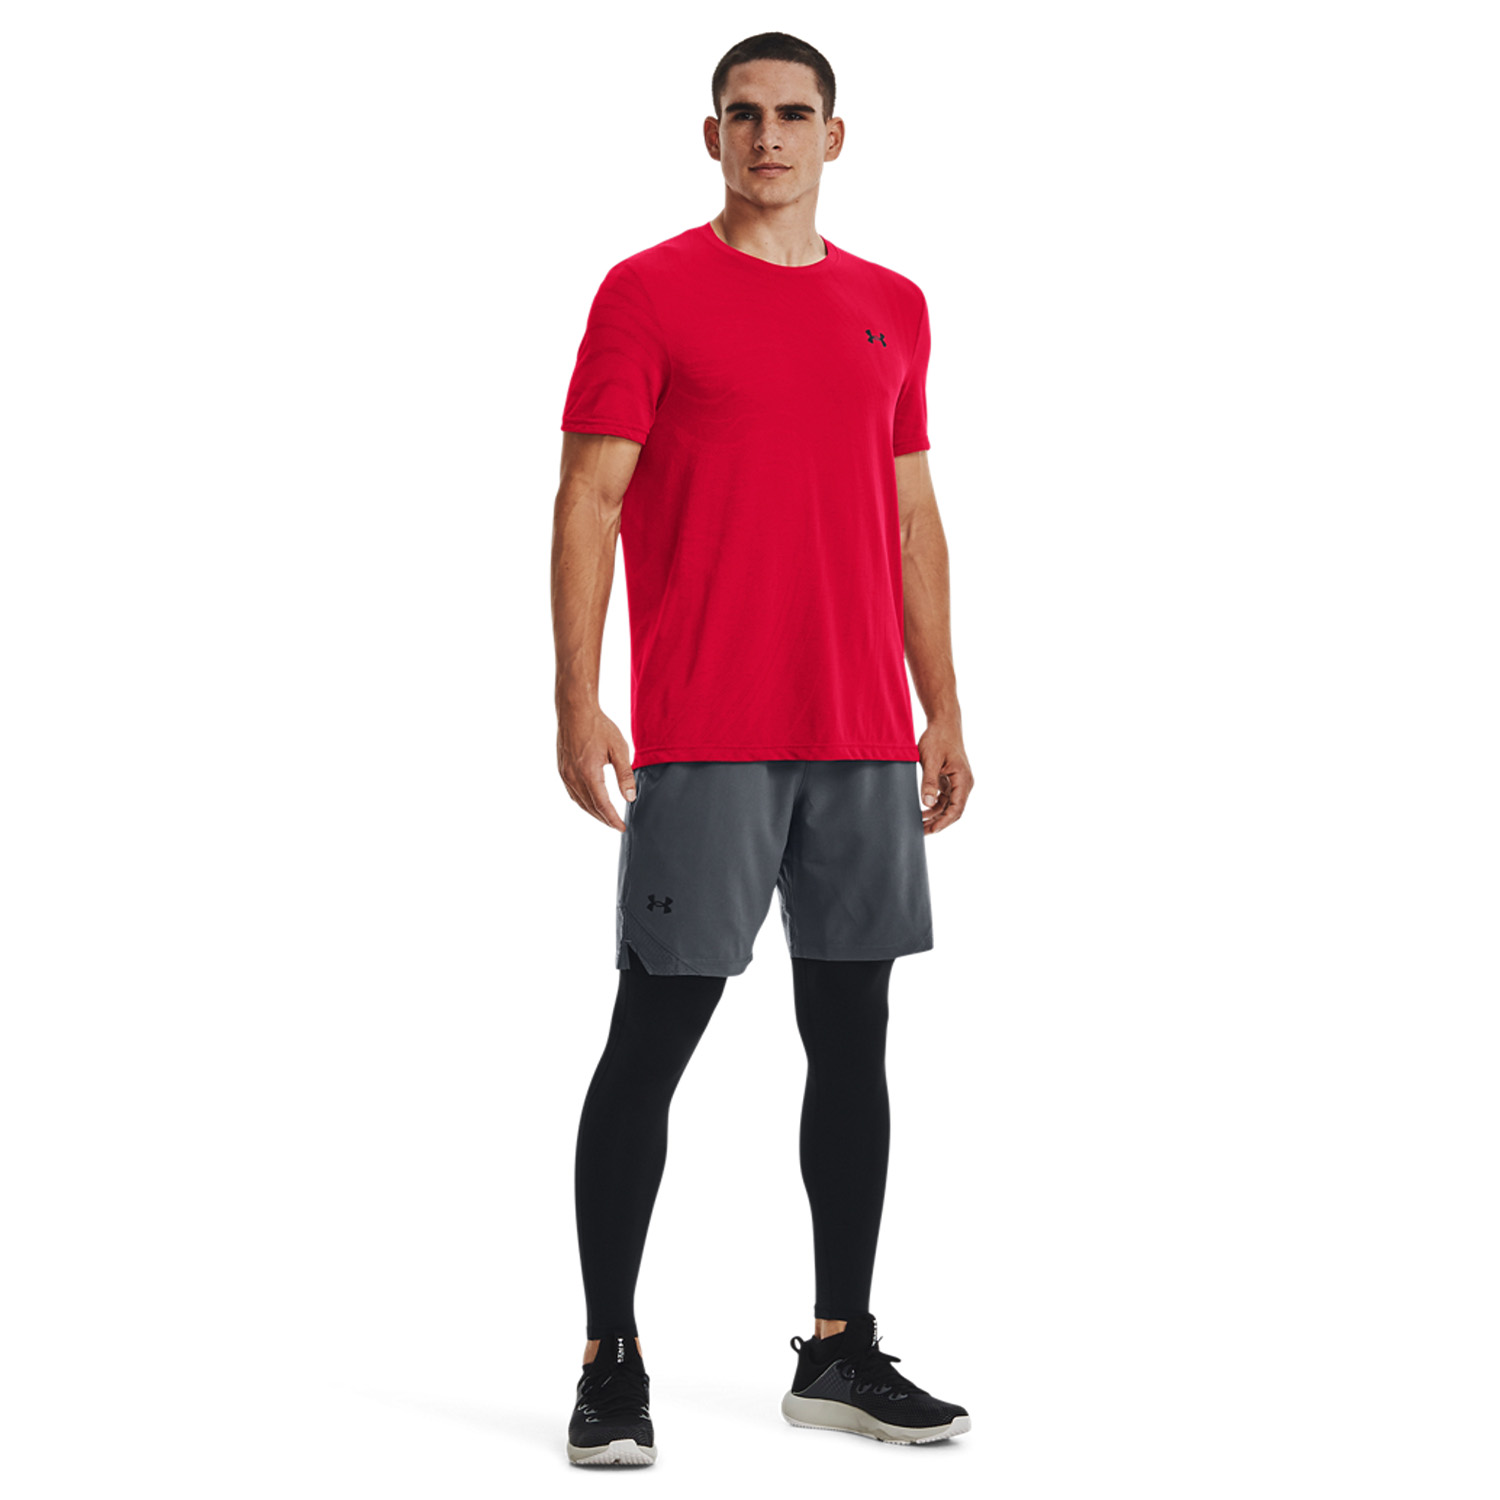 Under Armour Vanish Woven 8in Shorts - Pitch Gray/Black